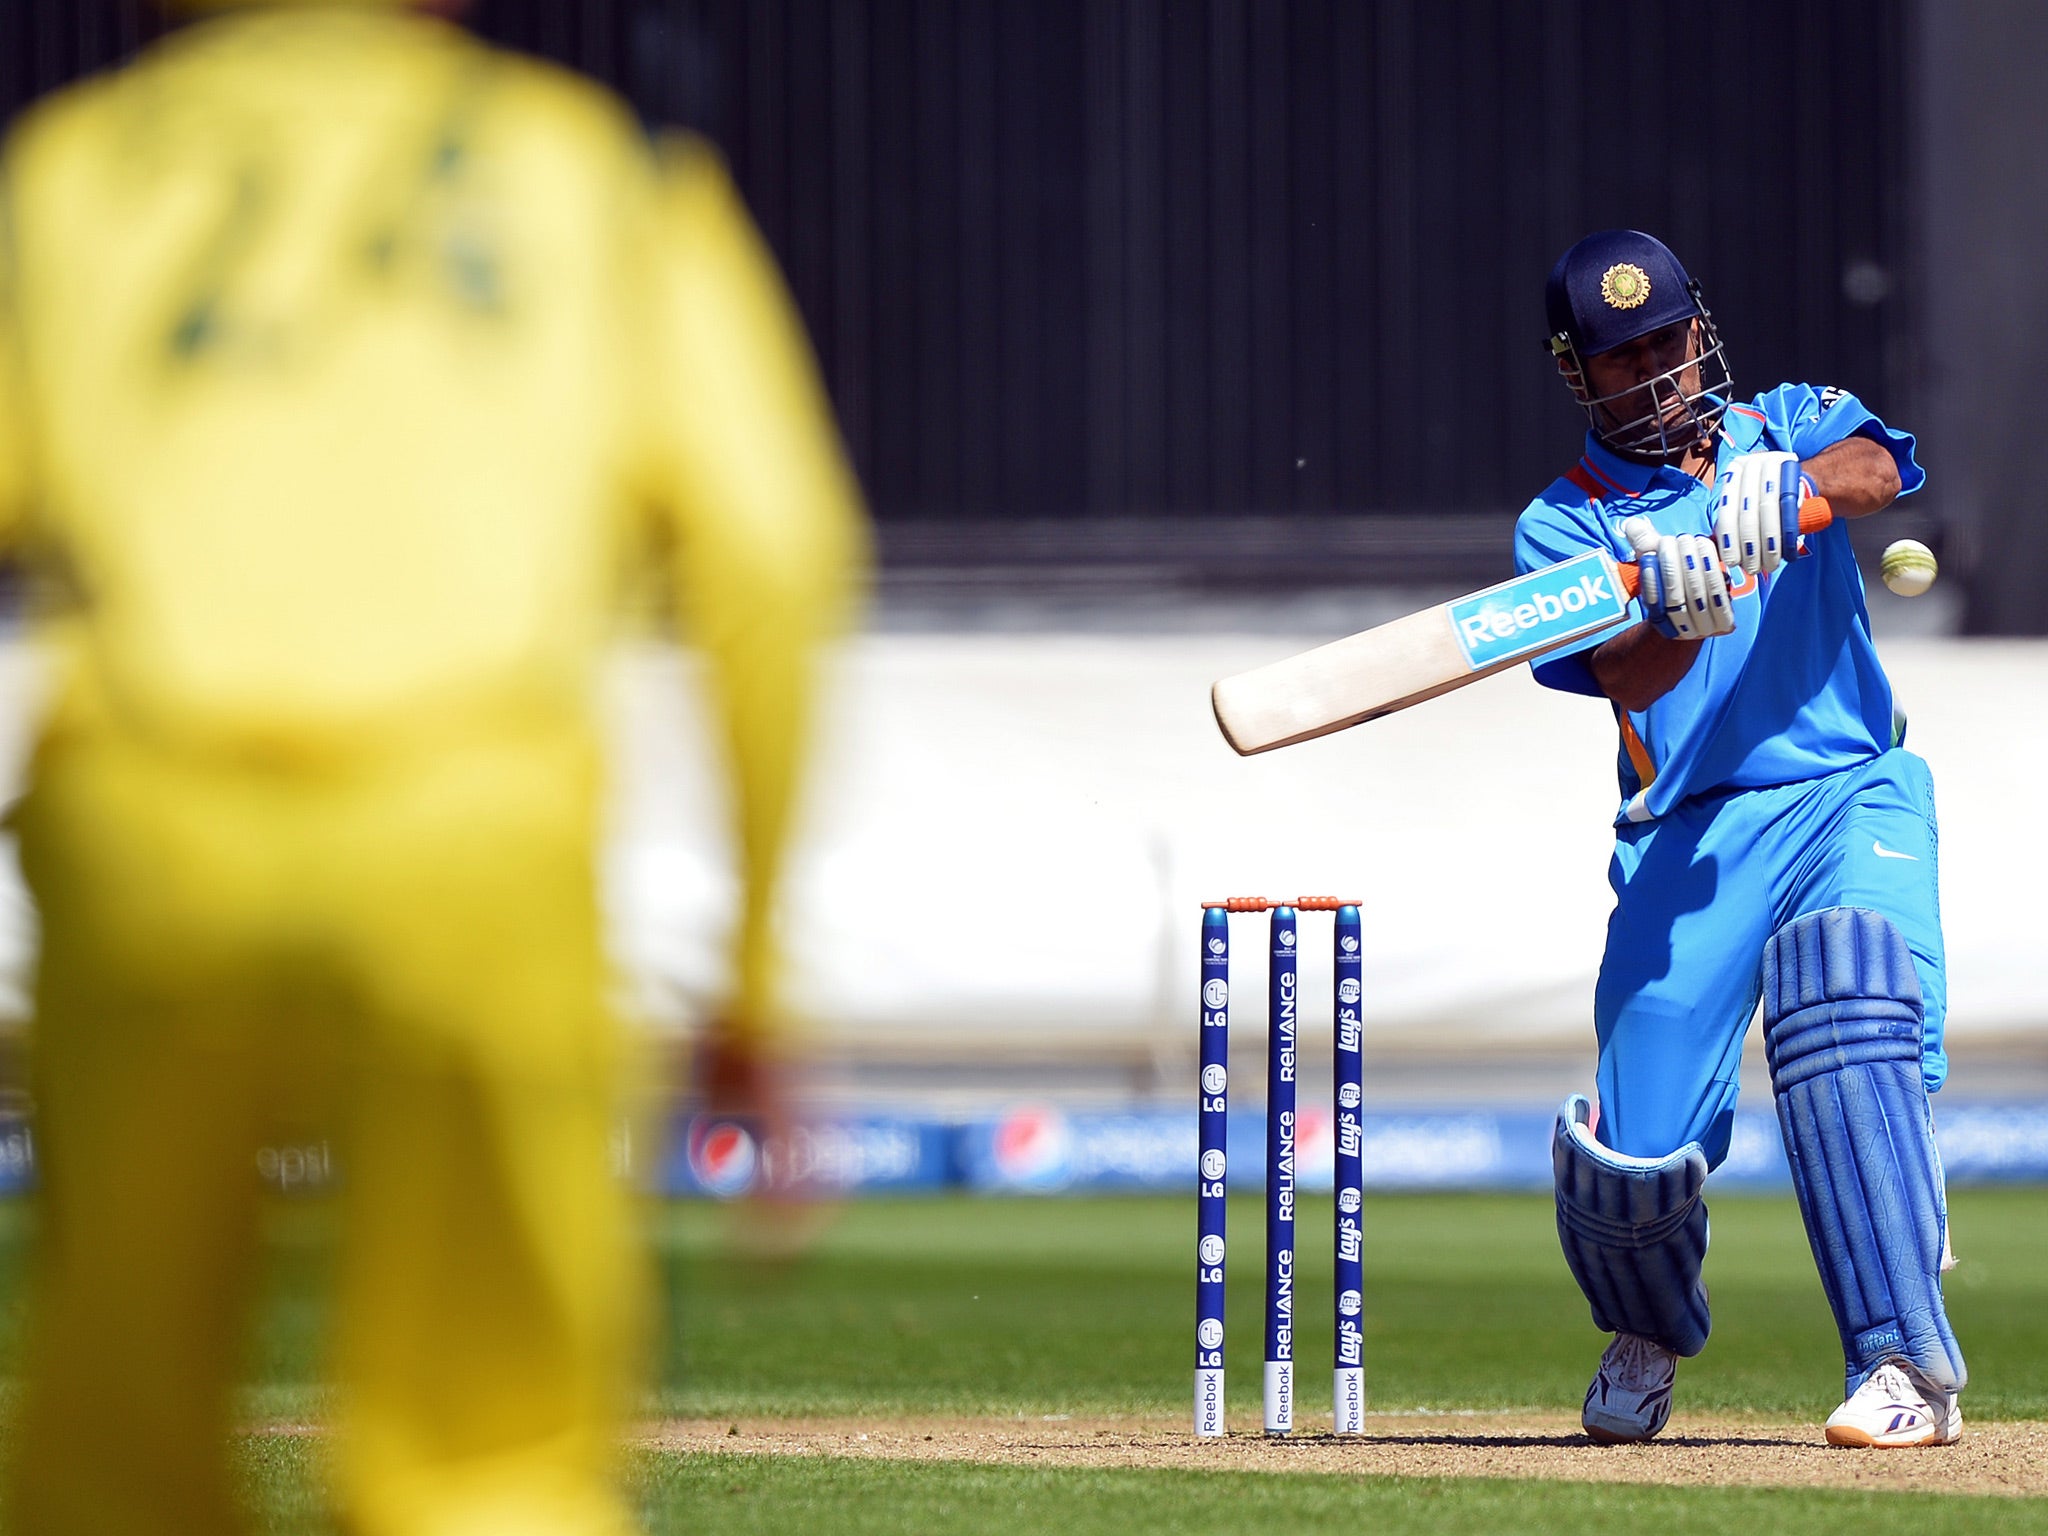 India's captain Mahendra Singh Dhoni plays a shot during the warm-up cricket match ahead of the 2013 ICC Champions Trophy between India and Australia at The Cardiff Wales Stadium